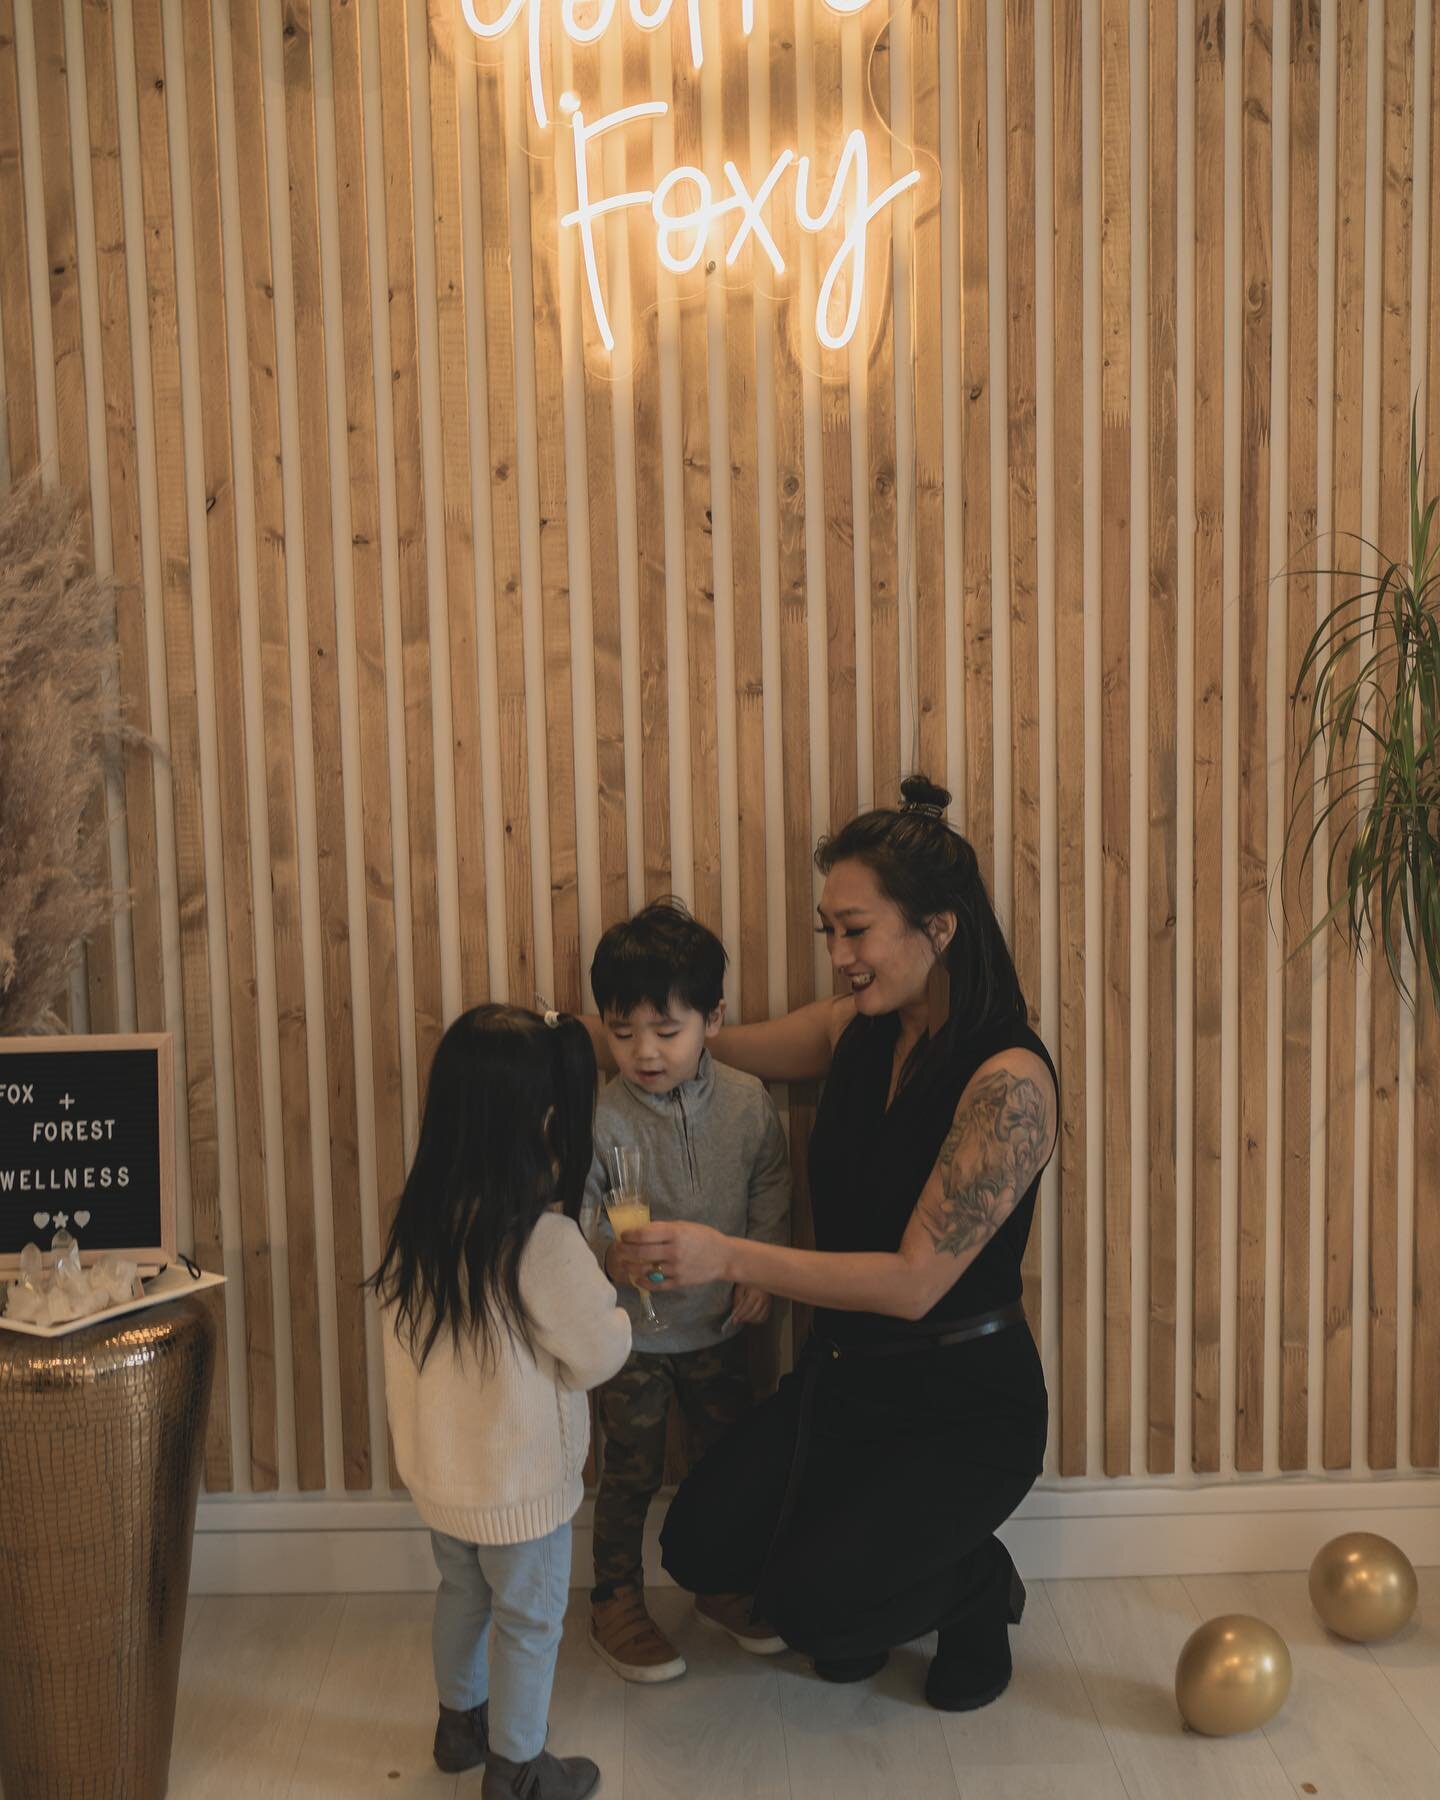 Grand Opening celebrations with loved ones. 

#champagnetoast #grandopening #foxandforest #neicesandnephews #yourefoxy #love #acupuncture #northshore #lonsdale